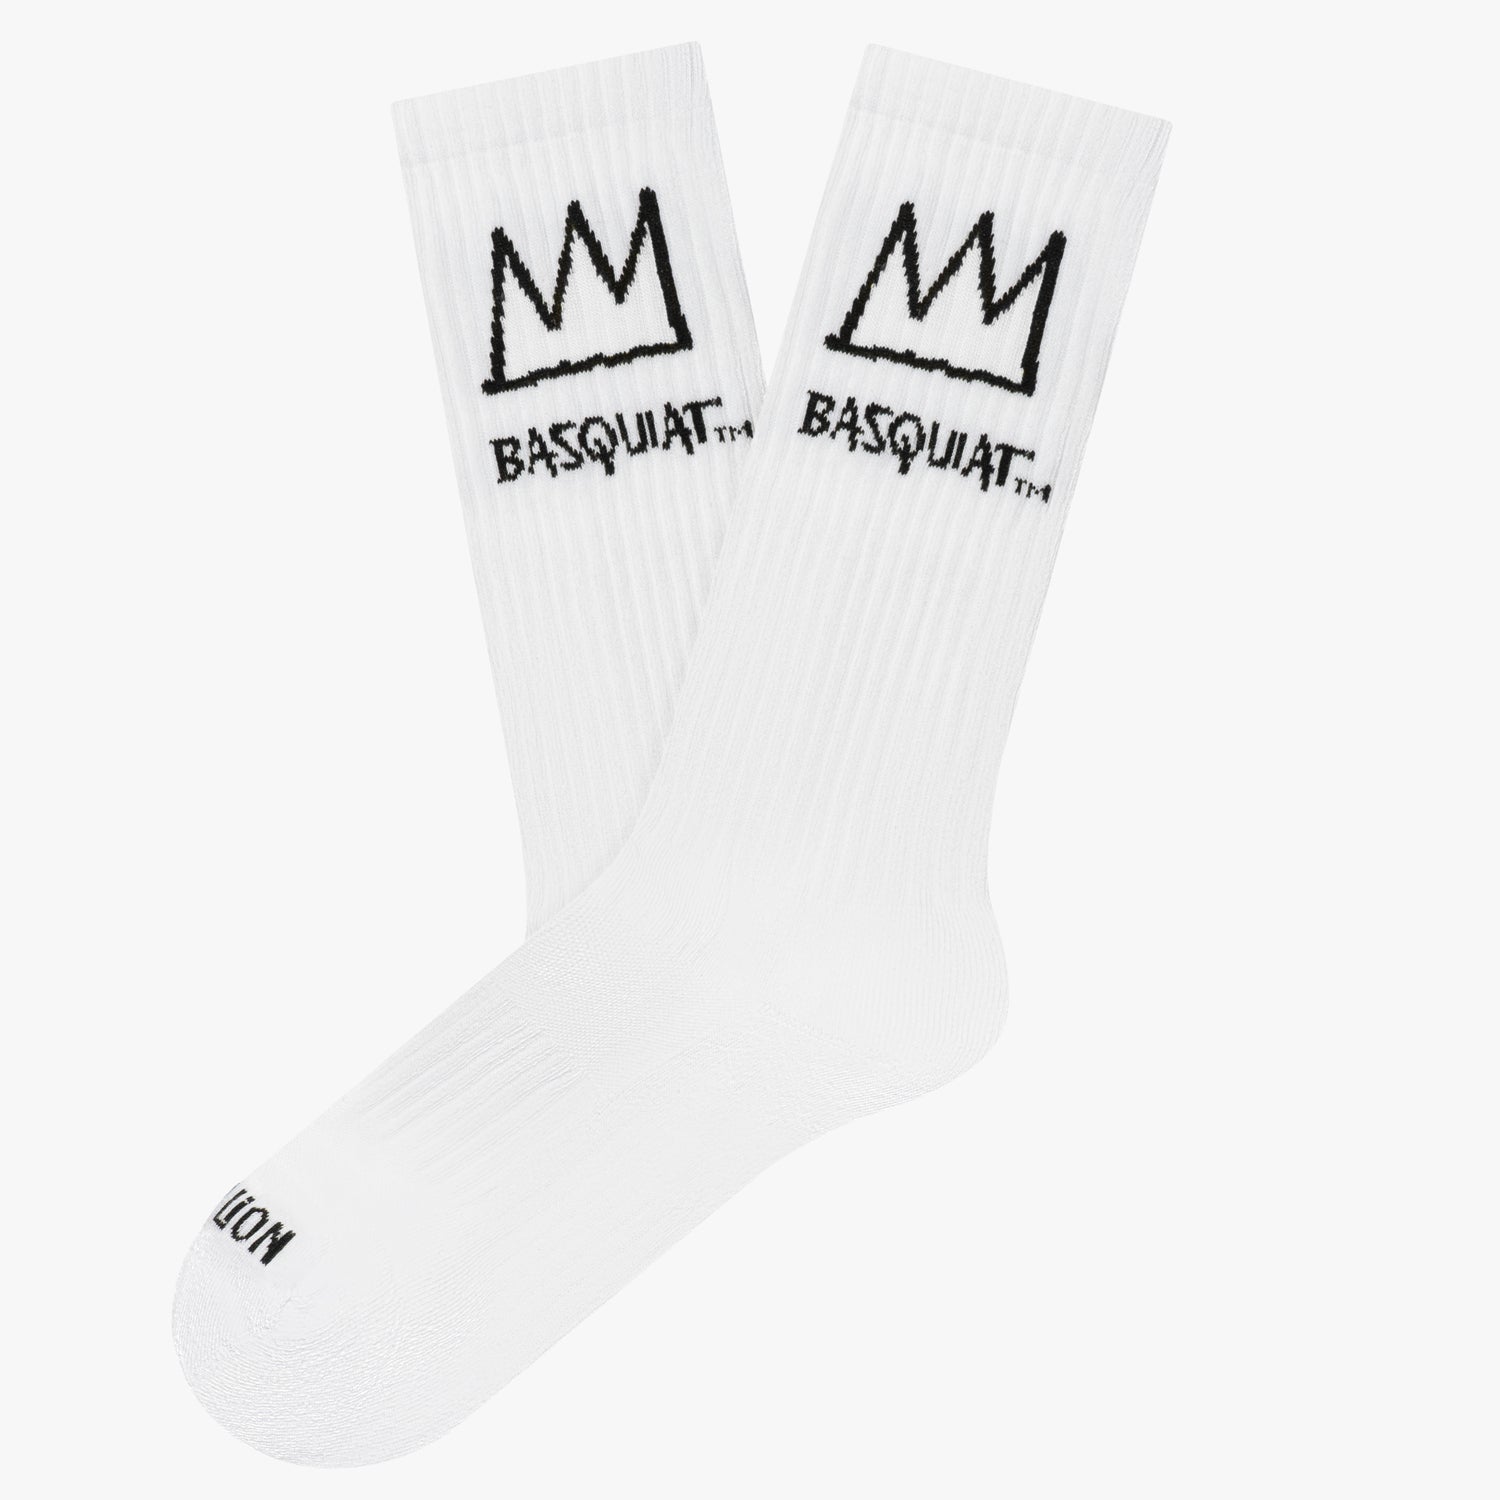 Athletic Basquiat Crown - Only